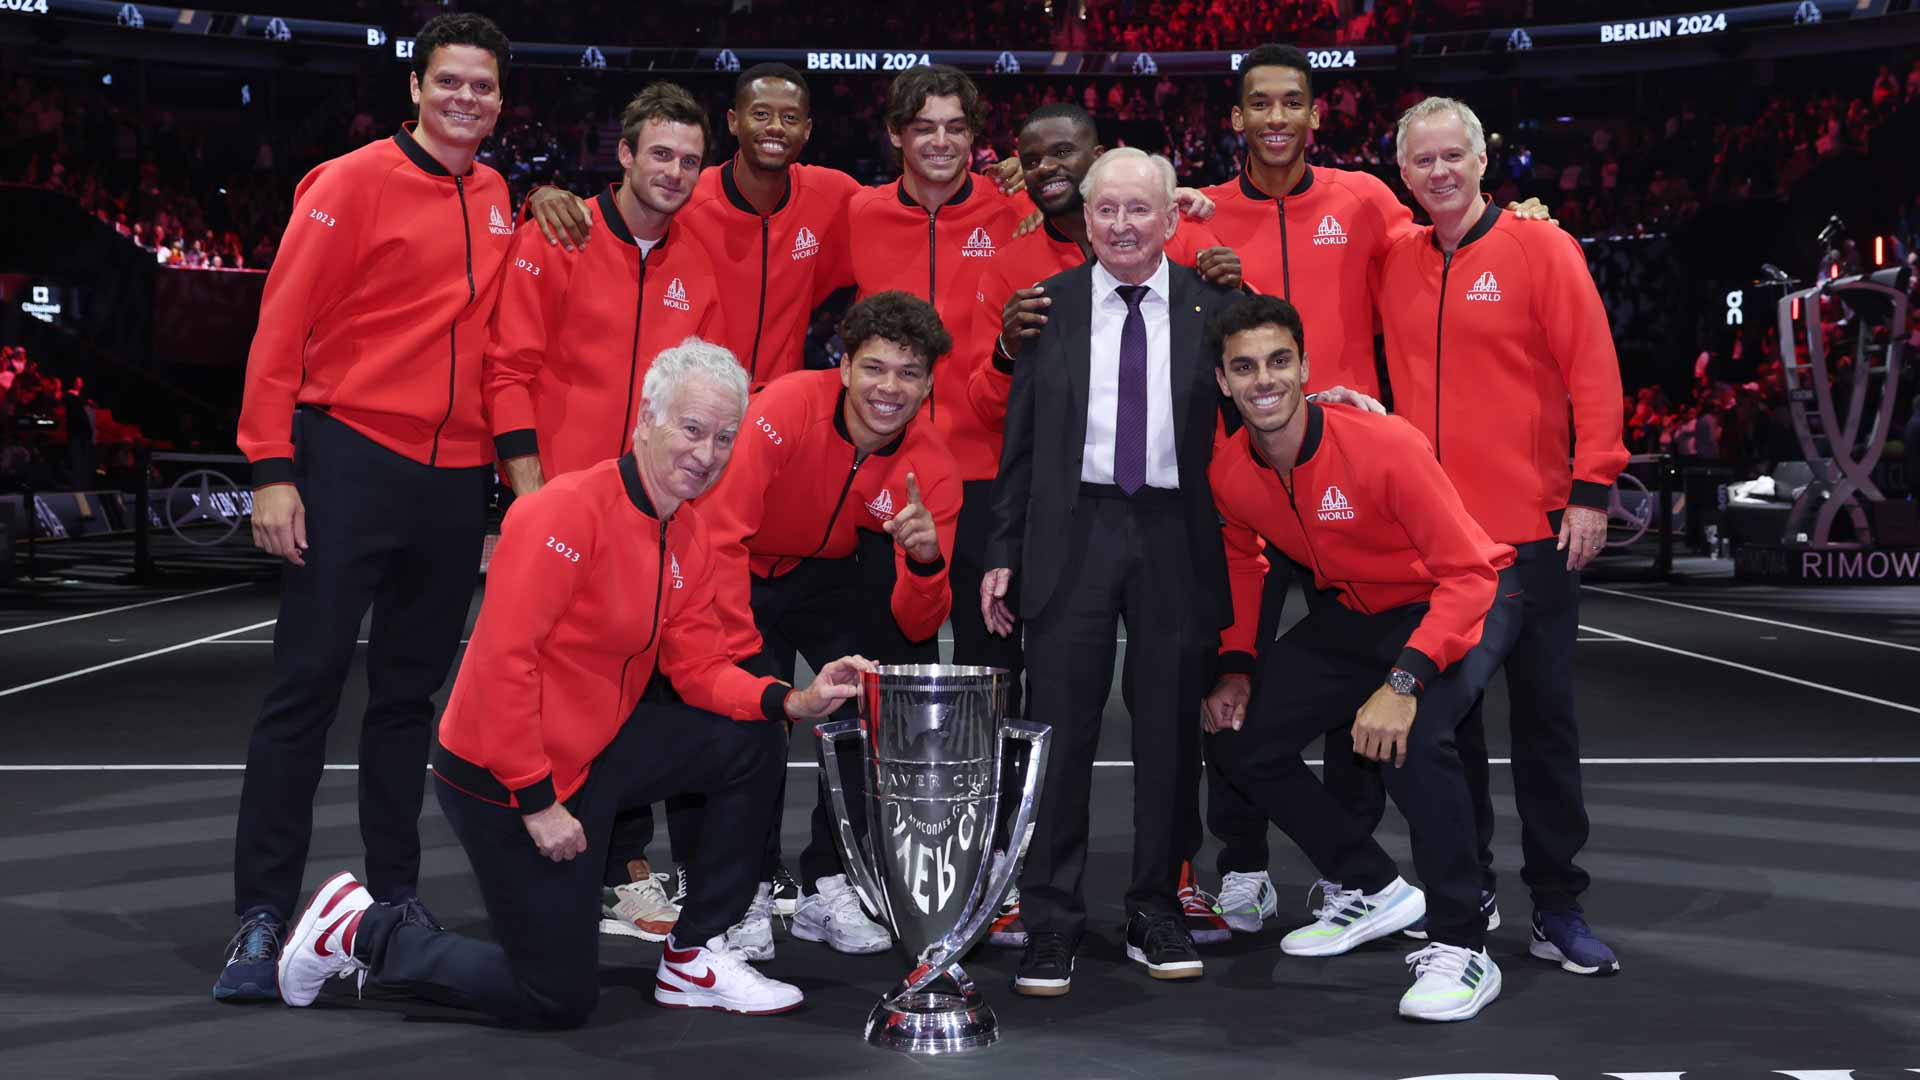 Team World wins the 2023 Laver Cup.